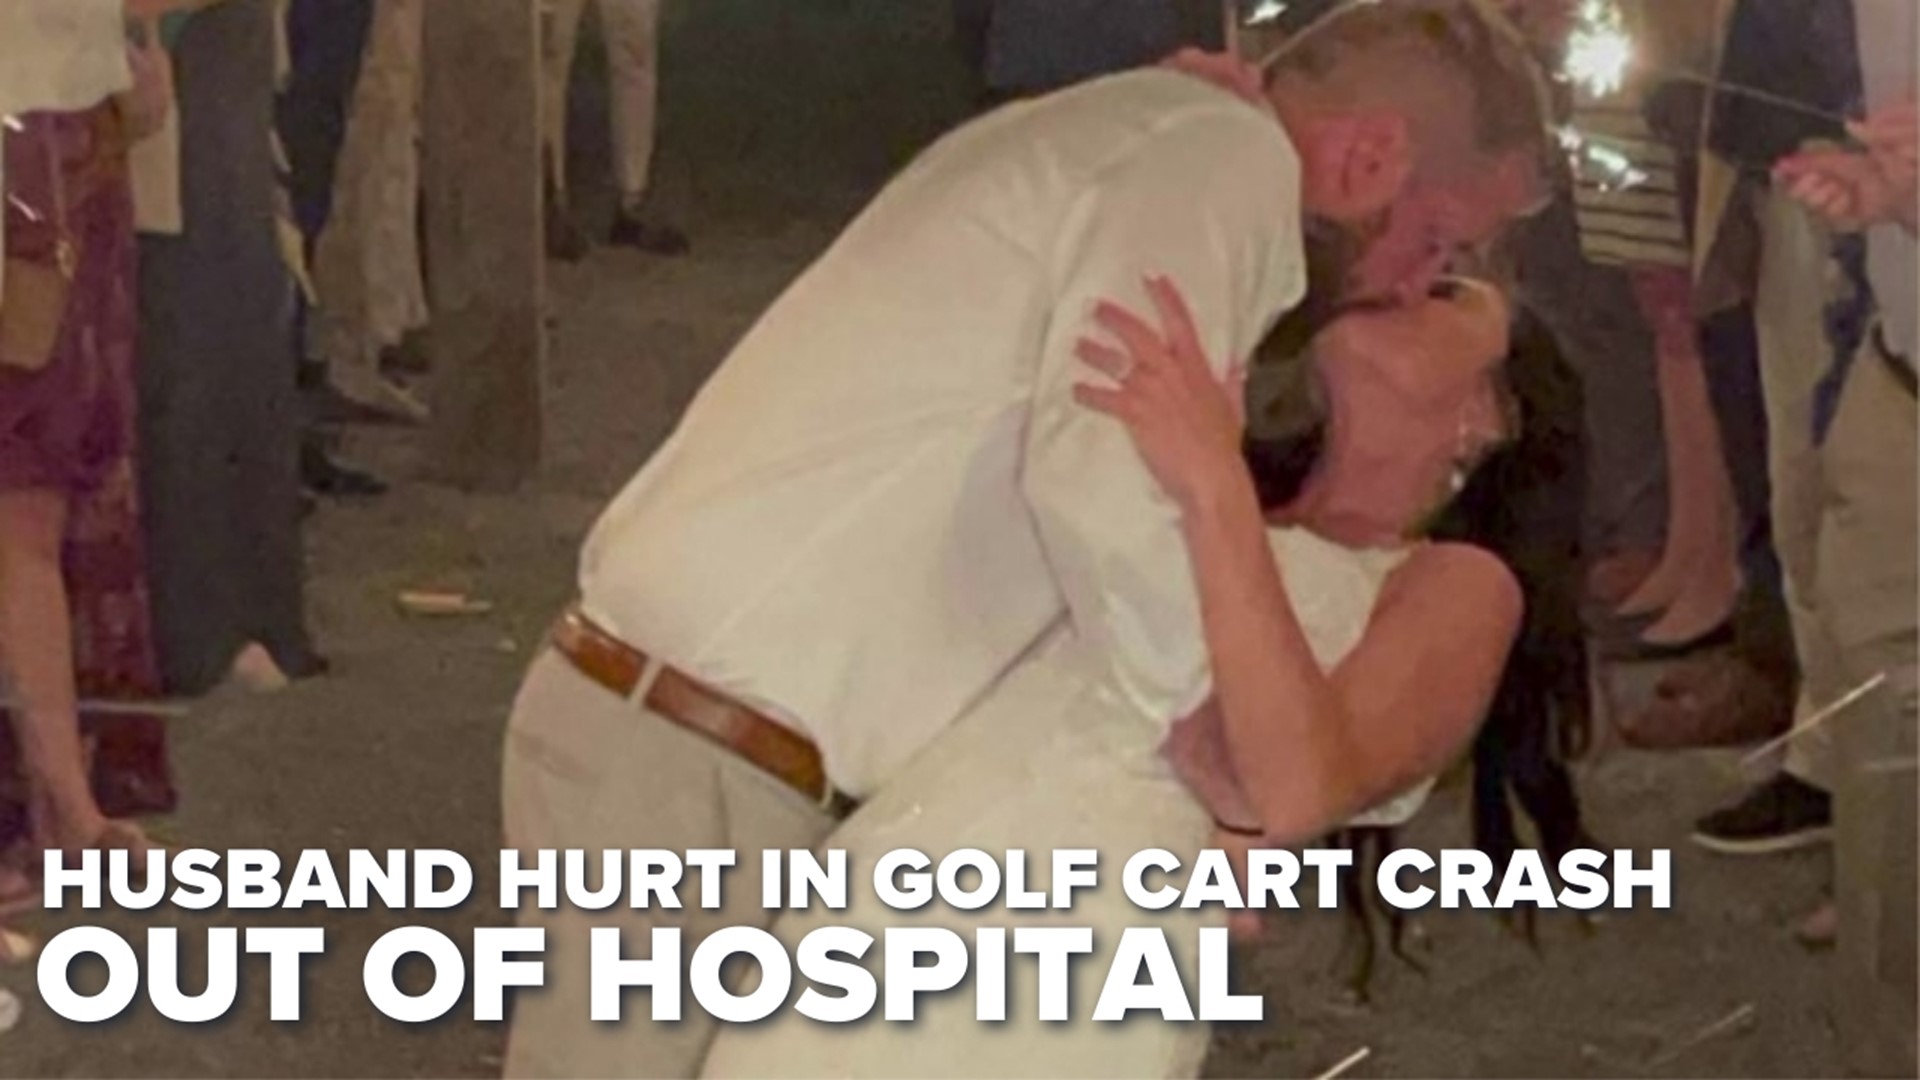 Aric Hutchinson suffered two broken legs, multiple broken bones in his face and brain injuries in a crash that killed his wife, Sam, hours after their wedding.